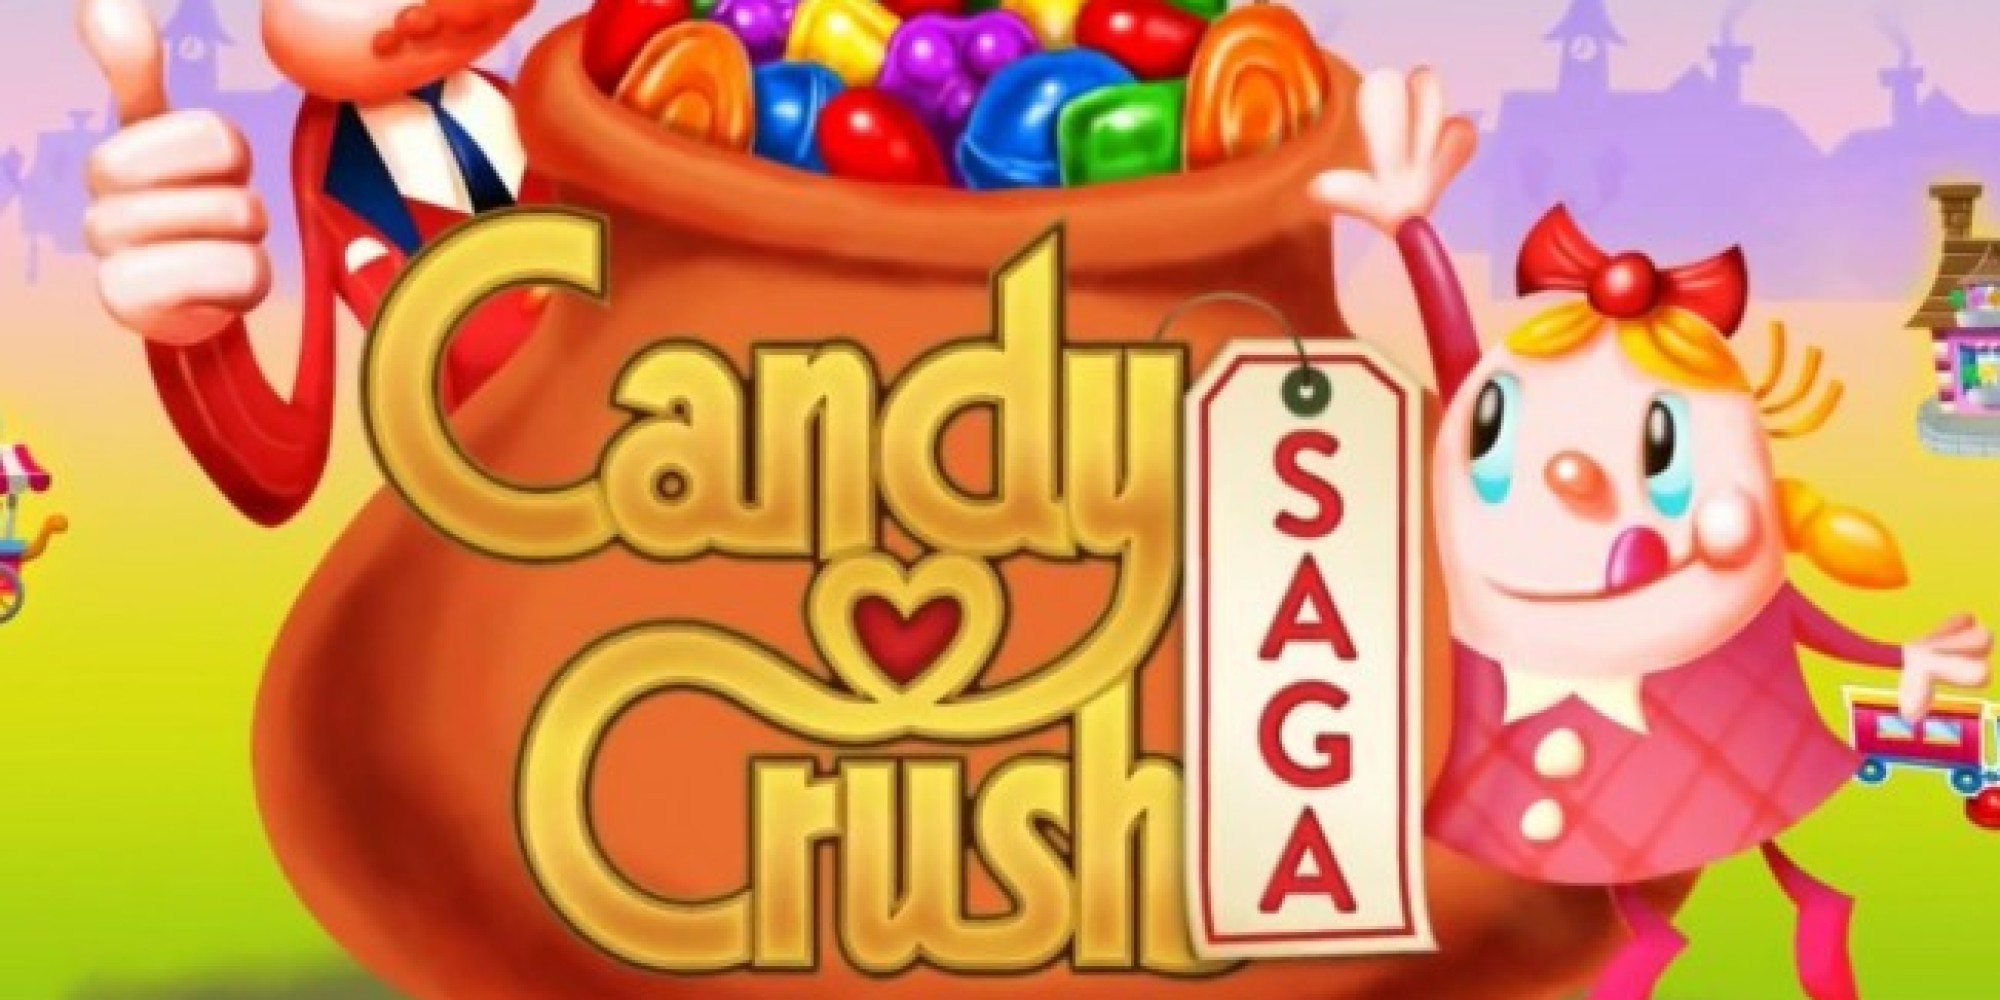 Here's The Scoop On The Latest 'Candy Crush' Trademark Saga